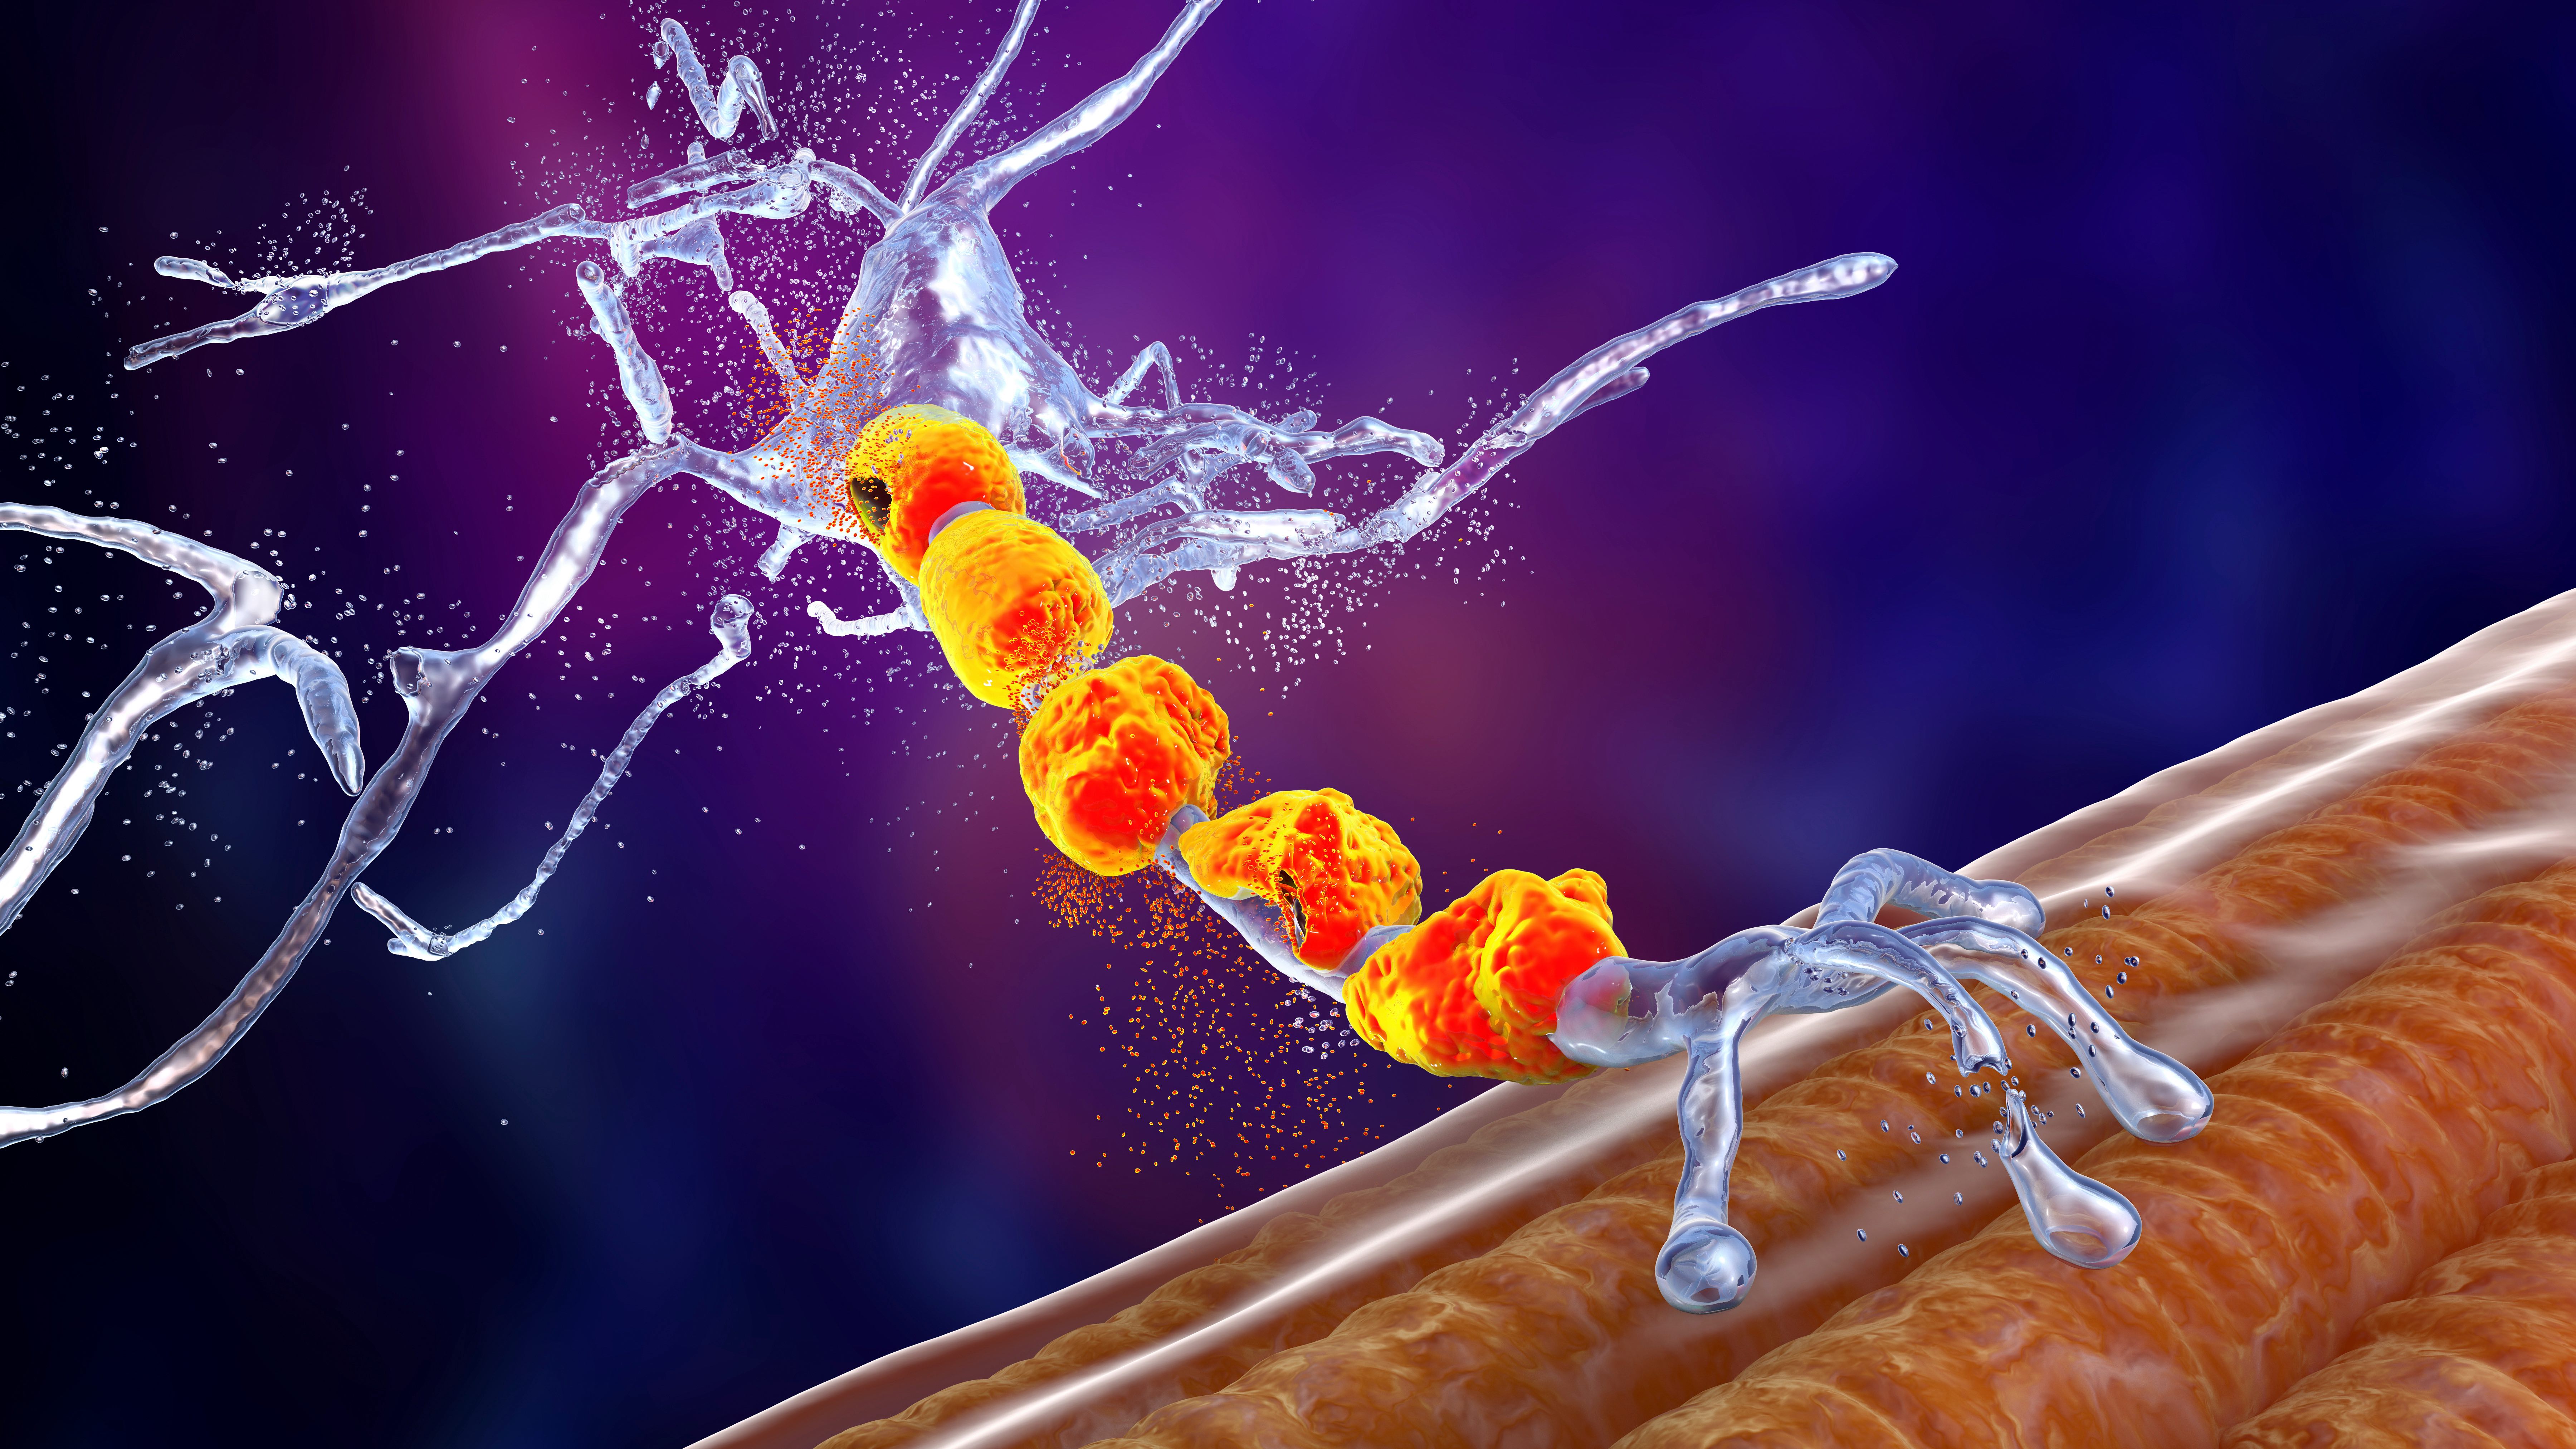 A graphic depicting the degeneration of a motor neuron. Image: Adobe